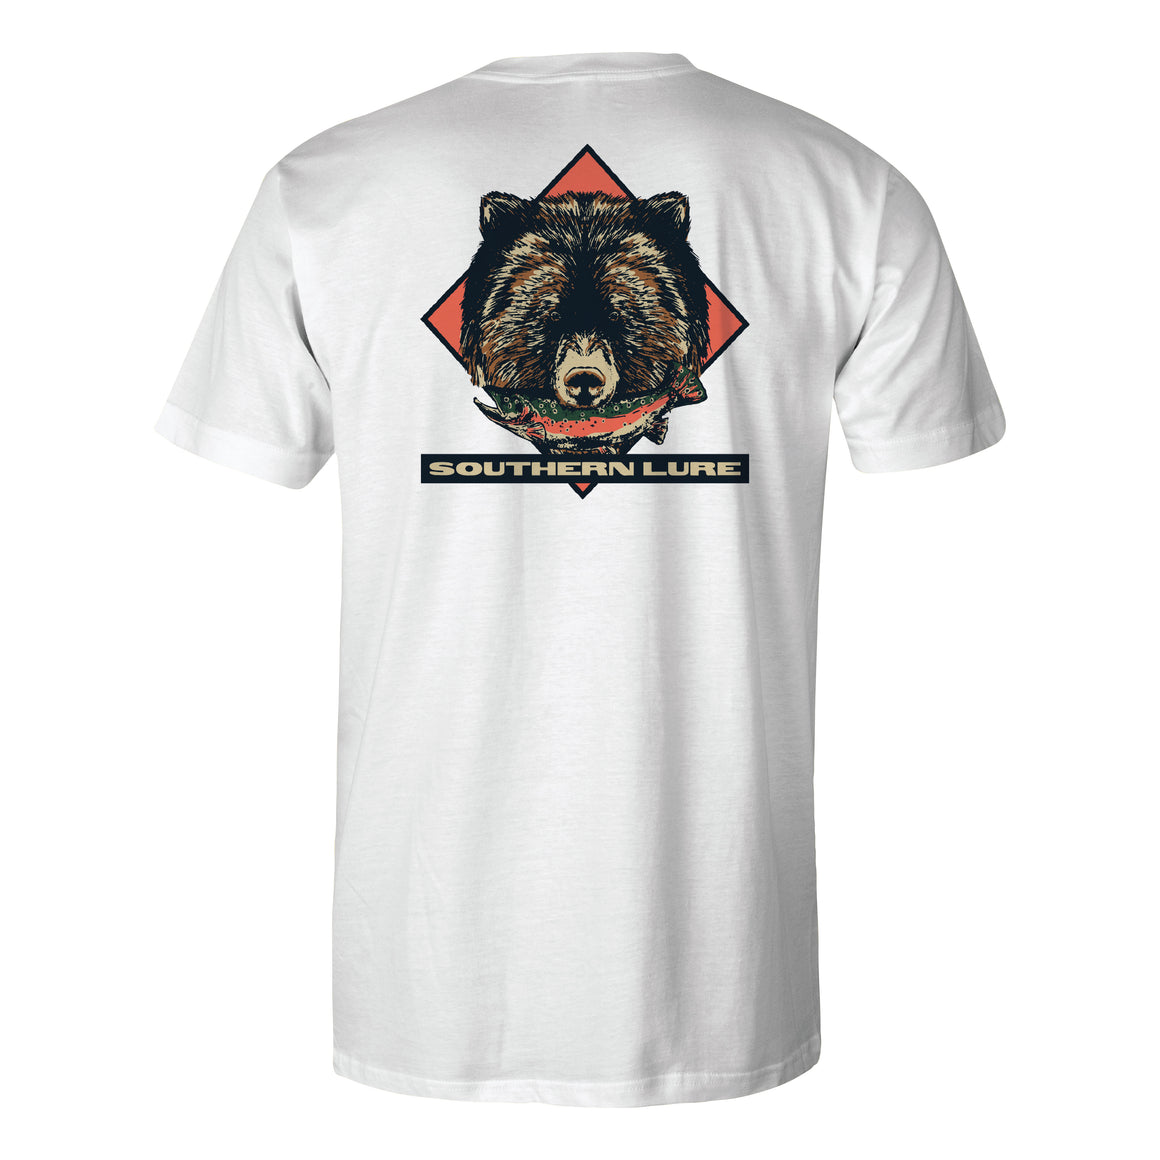 Toddler Short Sleeve Tee - Grizzly - White